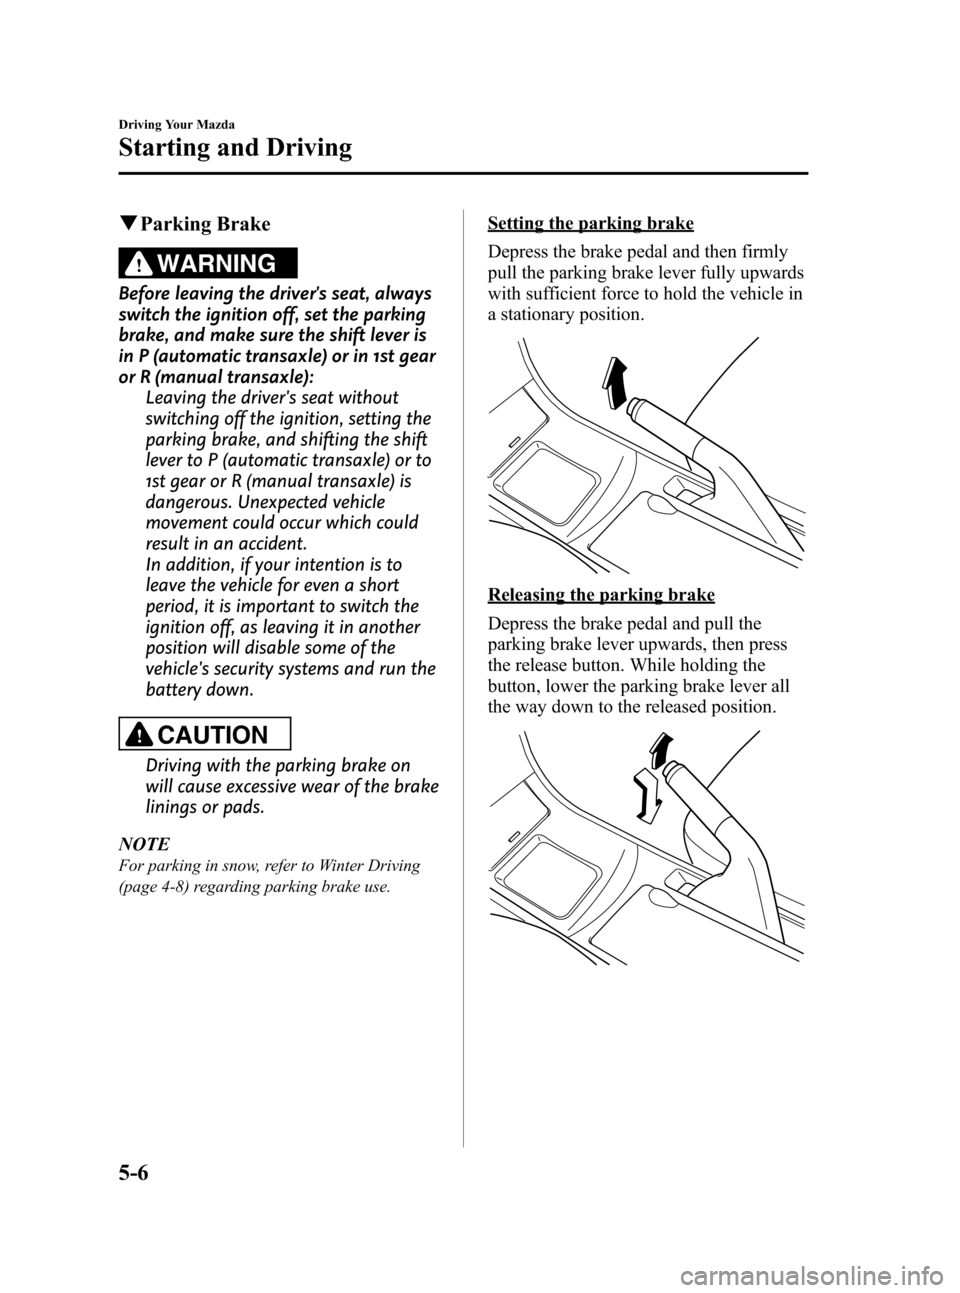 MAZDA MODEL 3 HATCHBACK 2010  Owners Manual (in English) Black plate (162,1)
qParking Brake
WARNING
Before leaving the drivers seat, always
switch the ignition off, set the parking
brake, and make sure the shift lever is
in P (automatic transaxle) or in 1s